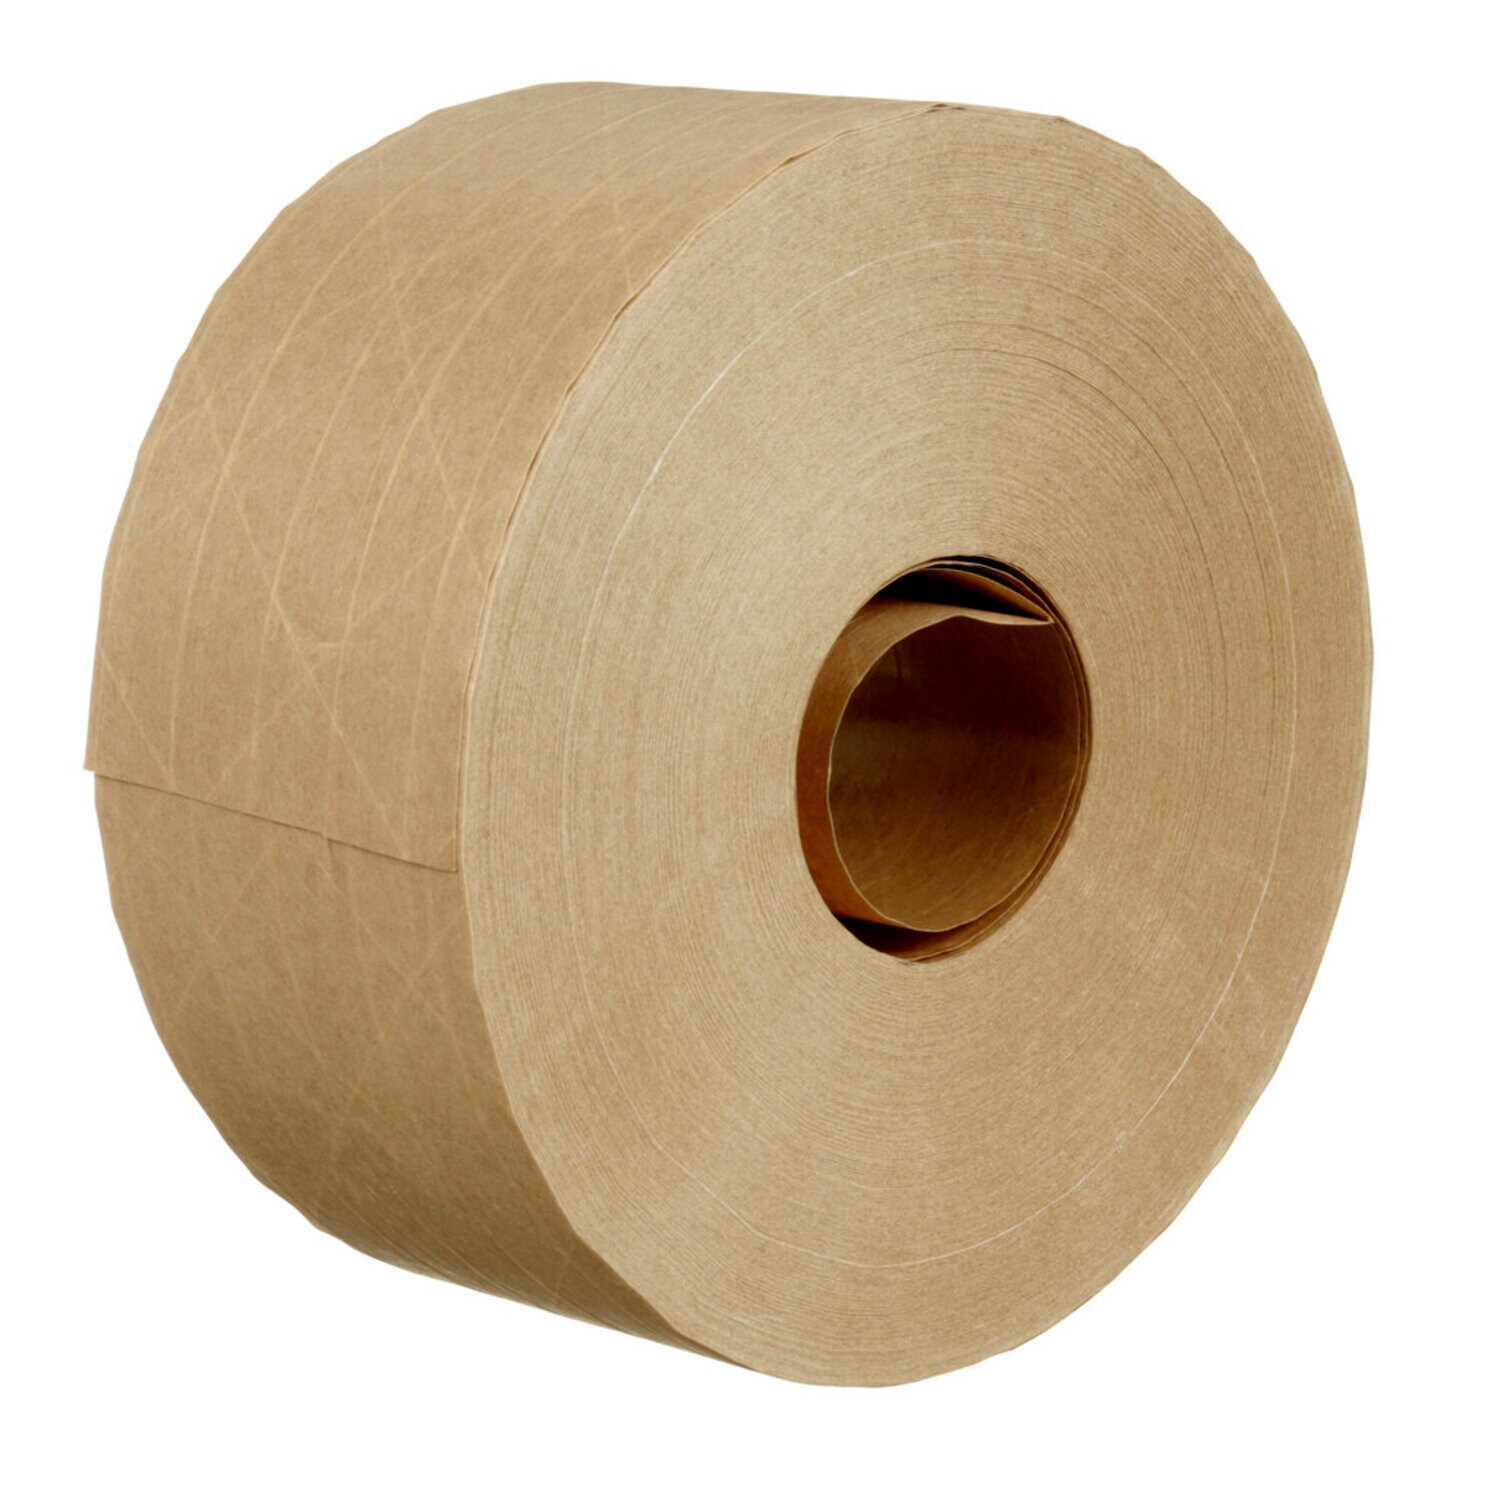 7000029099 - 3M Water Activated Paper Tape 6144, Natural, Economy Reinforced, 70 mm x 450 ft, 10/Case